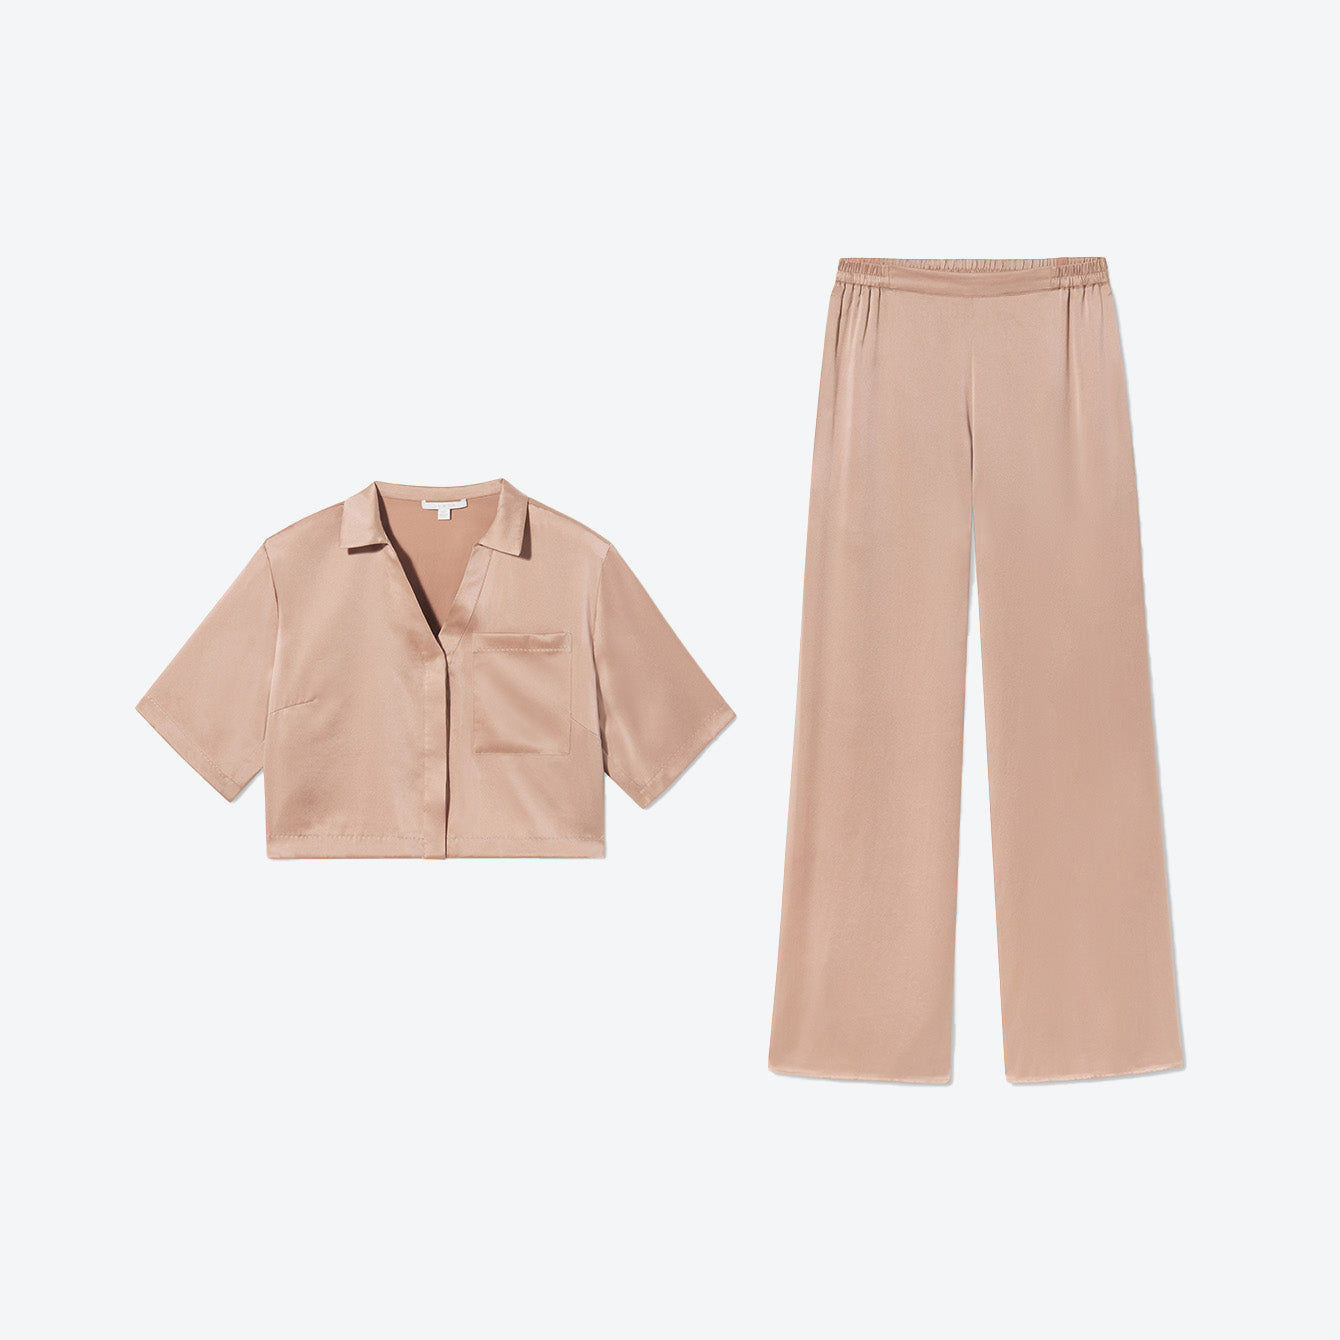 Washable Silk Button Down Pant Set, I Found Some Really Cute and  Inexpensive Matching Sets You'll Love